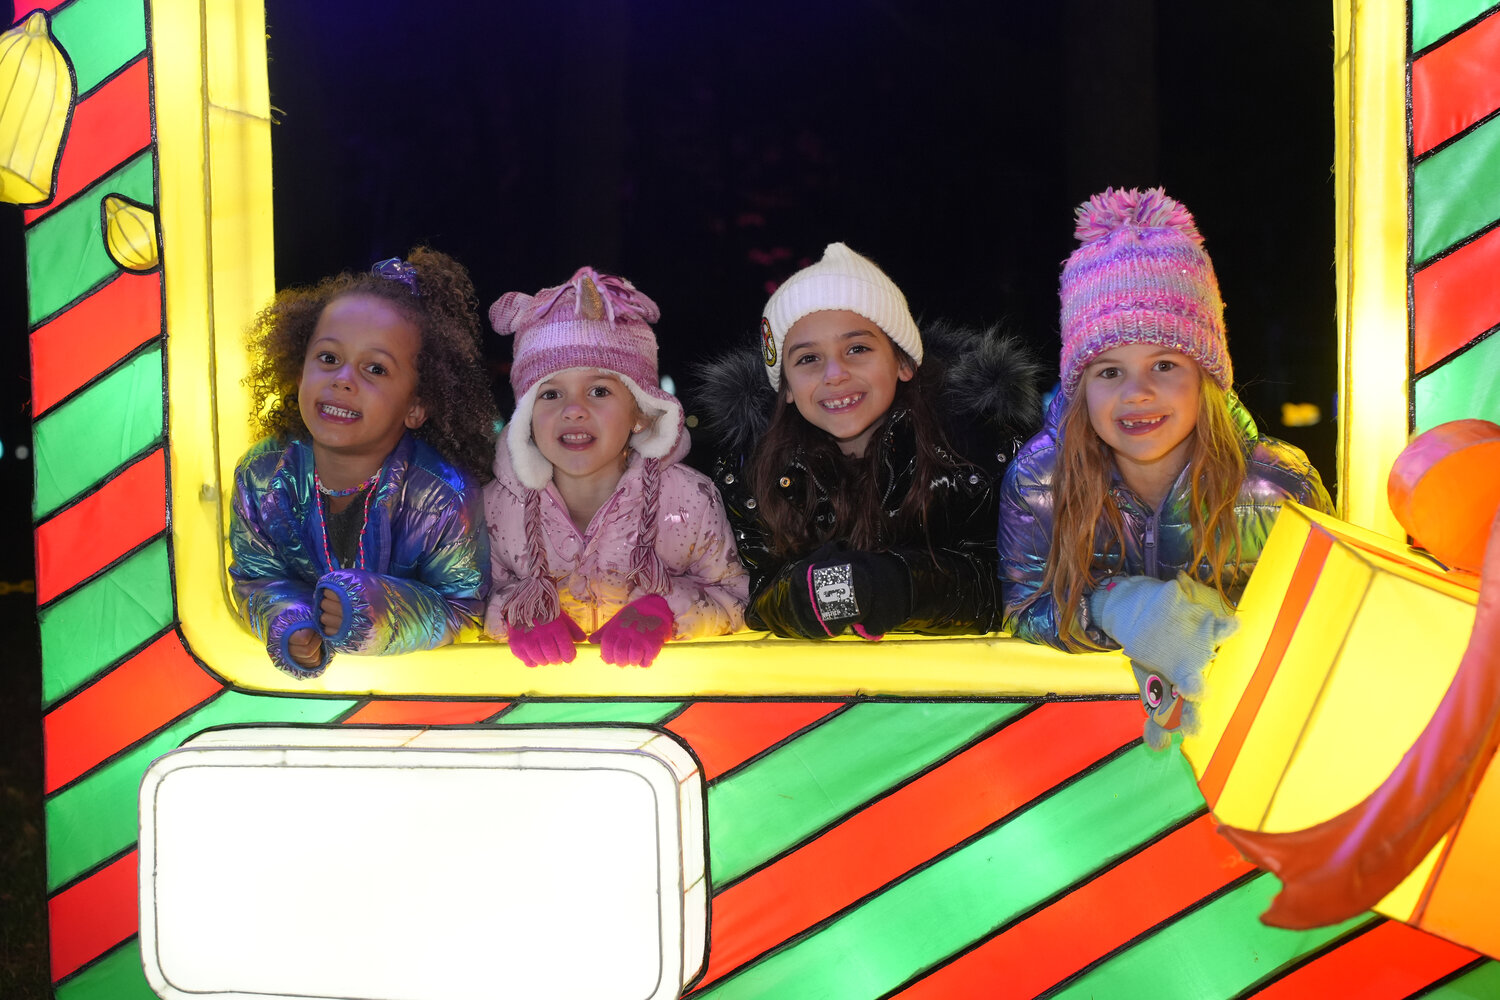 The LuminoCity Festival officially opened in Eisenhower Park, this year featuring lanterns designed by children through a program at the Long Island Children’s Museum. Aniyah Hanson, Charlotte Kuchek, Olivia, Cresant and Emma Kuchek enjoyed the display during Nassau County’s preview day.